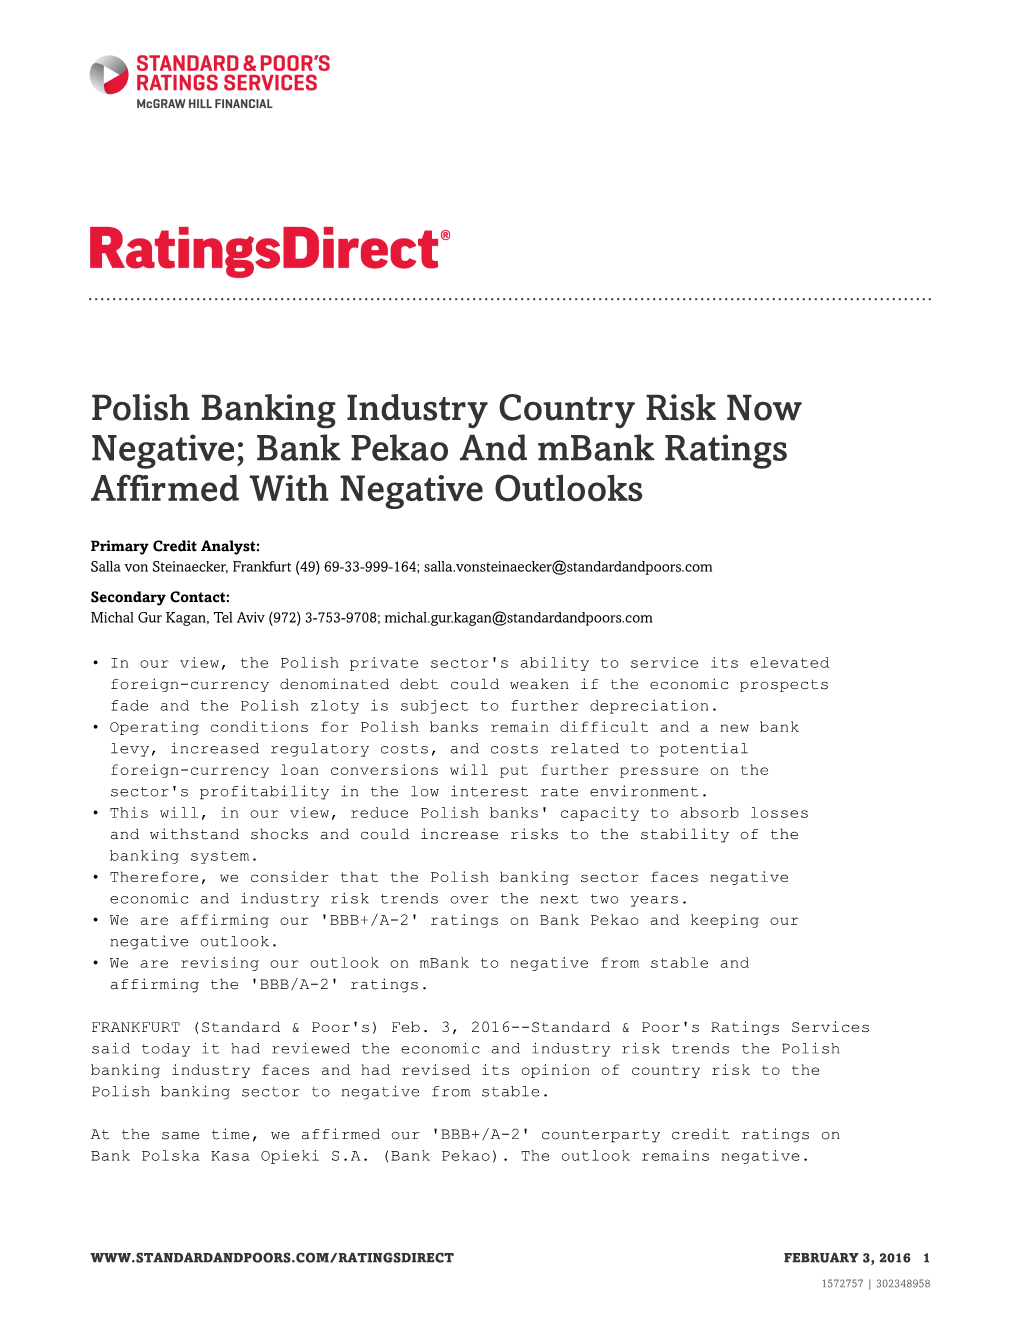 Bank Pekao and Mbank Ratings Affirmed with Negative Outlooks